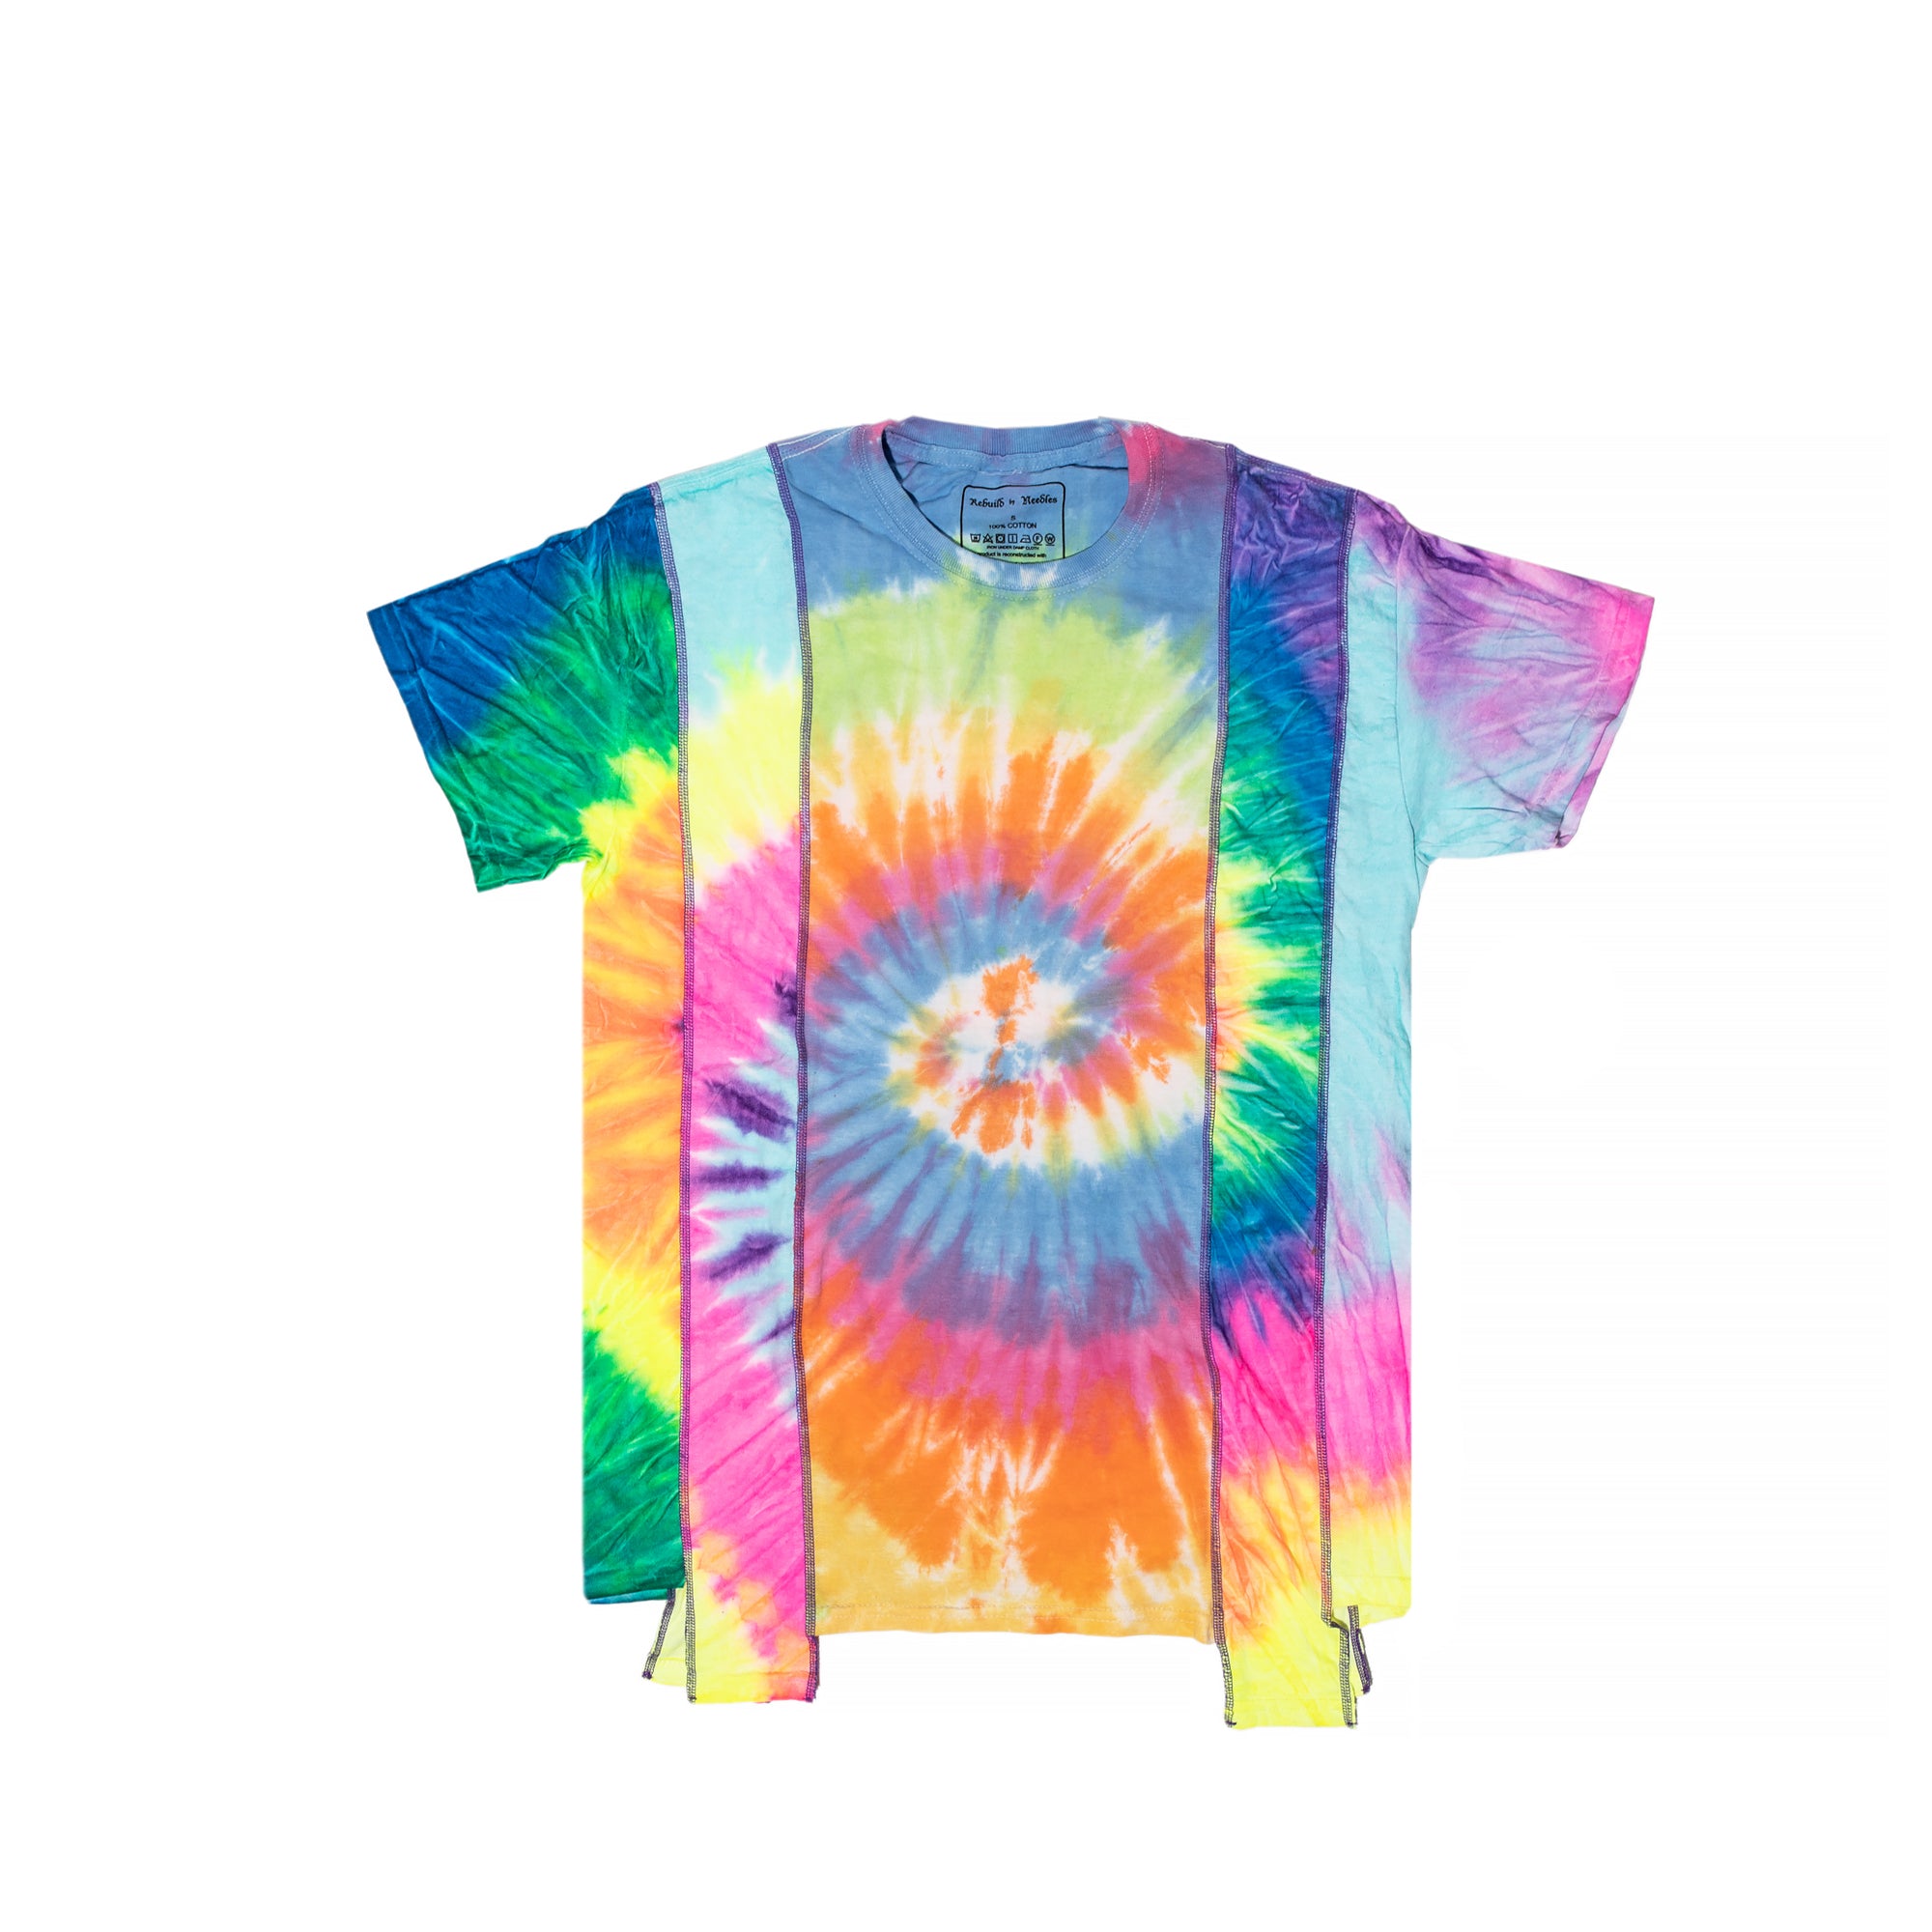 Needles Mens Rebuild 5 Cuts SS Tee Tie Dye – Extra Butter